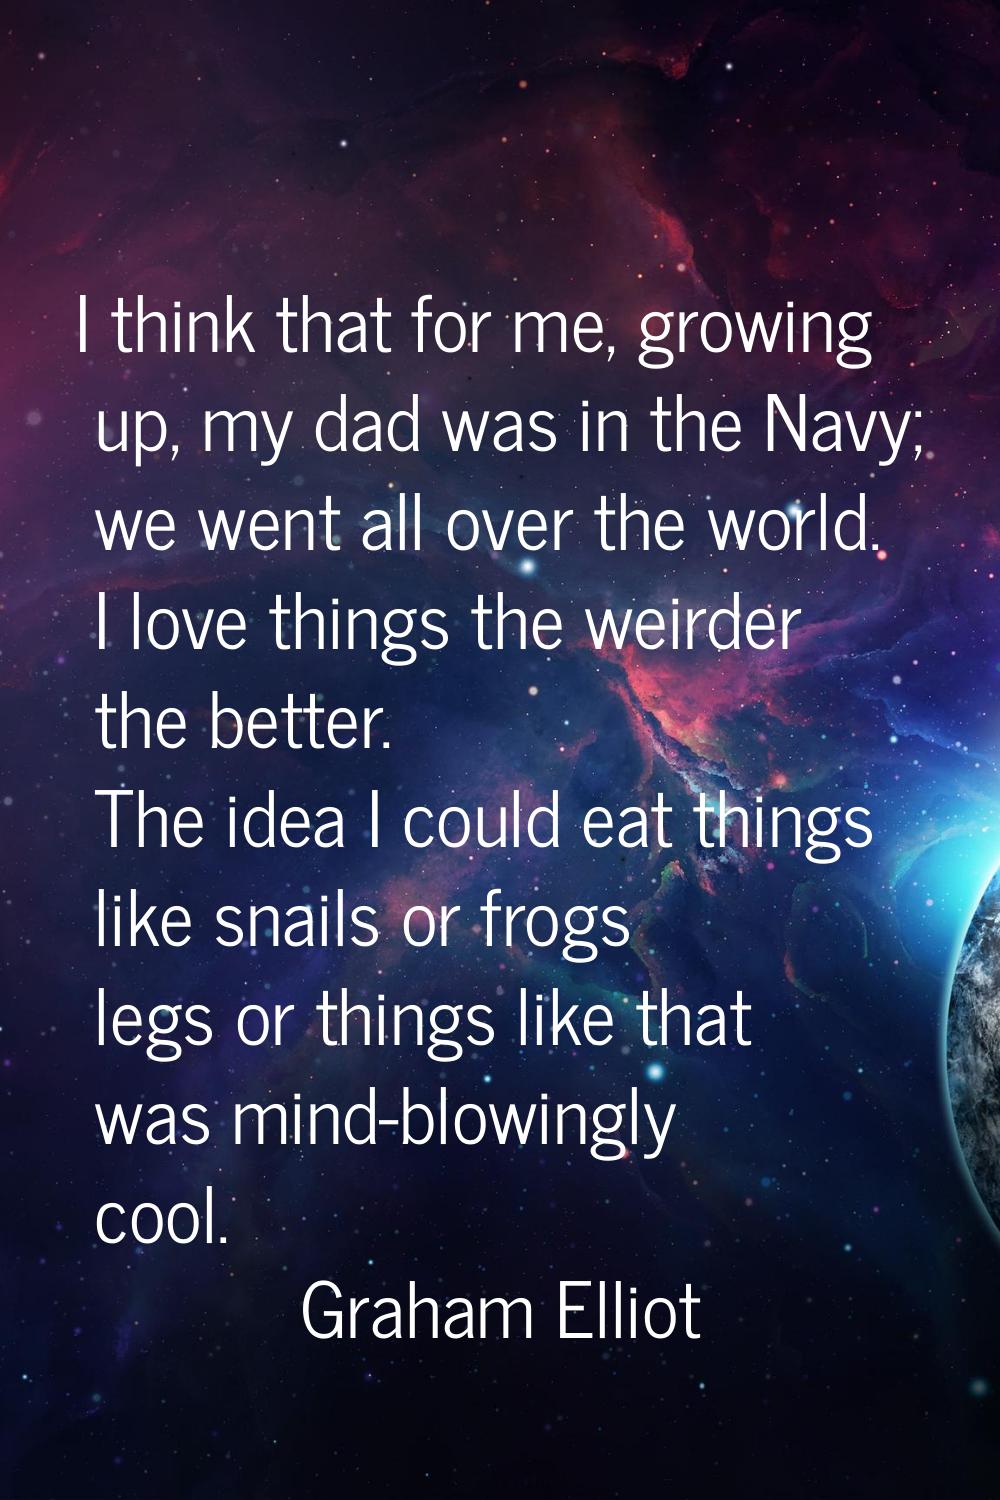 I think that for me, growing up, my dad was in the Navy; we went all over the world. I love things 